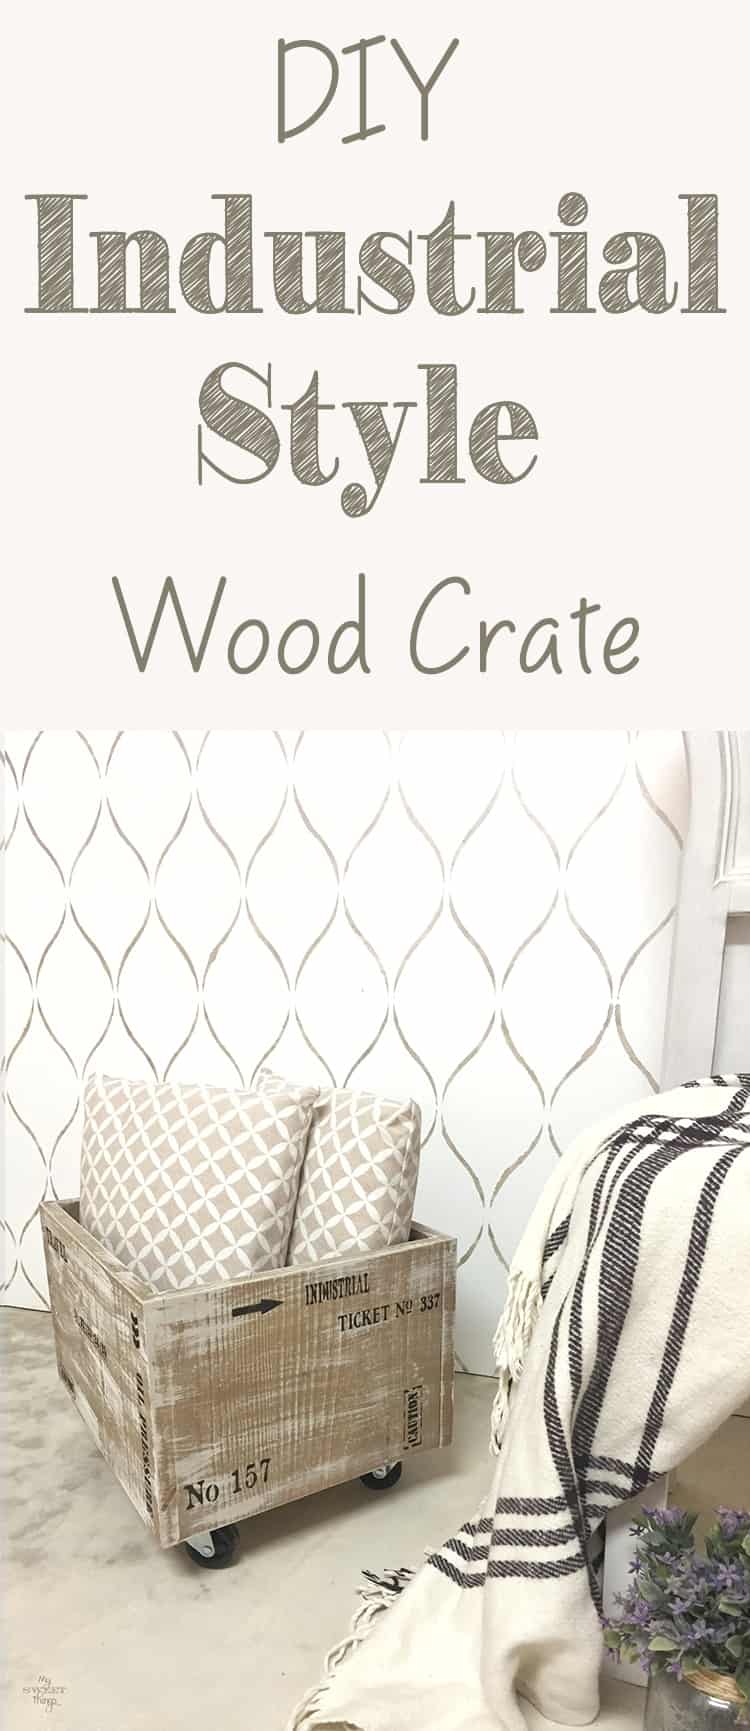 How to make an easy industrial style wood crate with some paint and stencils · Via www.sweethings.net